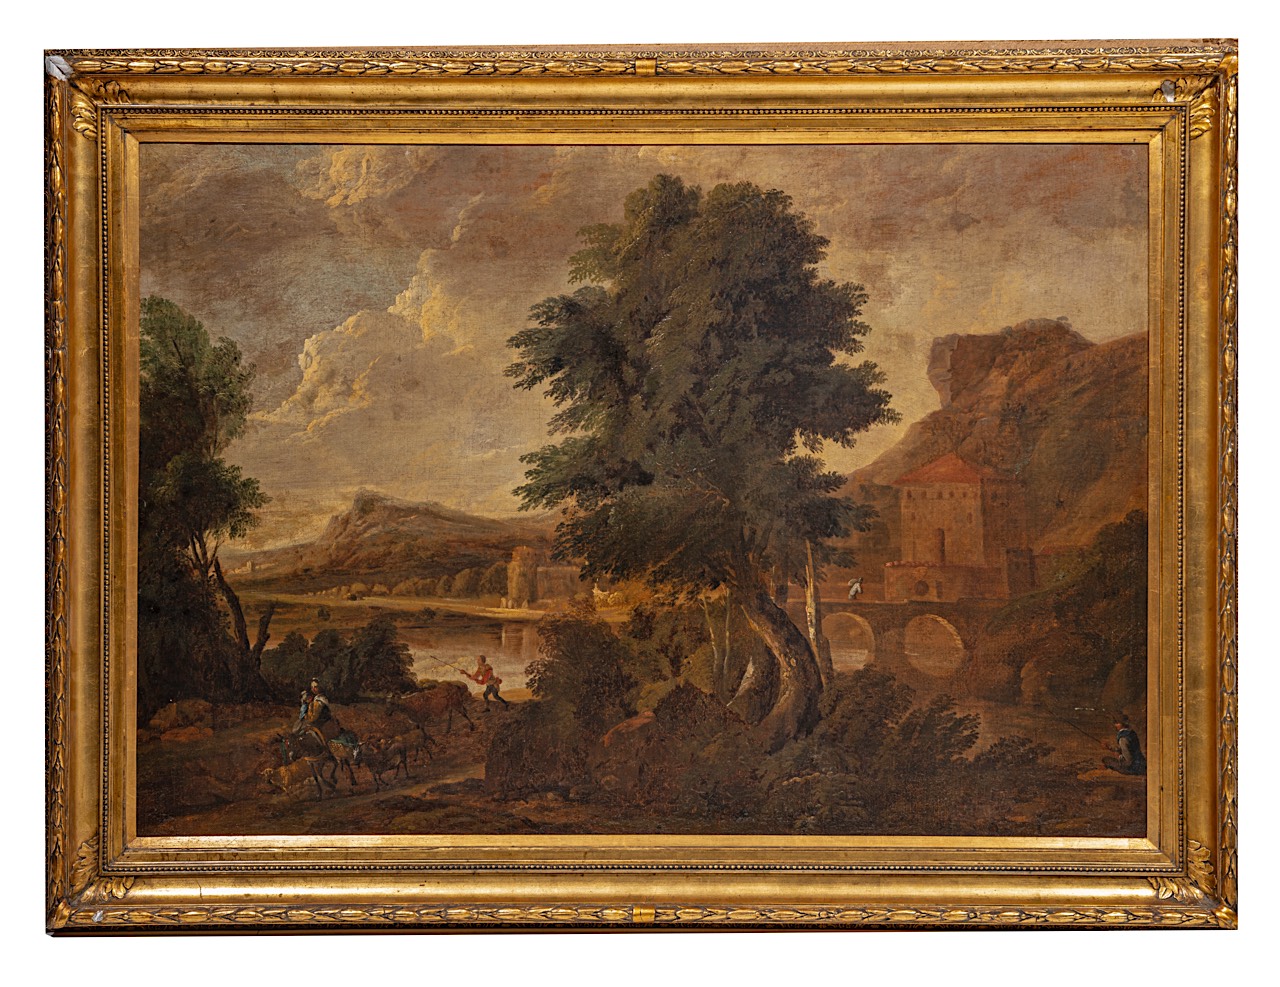 An Italianised pastoral landscape, 17thC Dutch School, oil on canvas 77 x 110 cm. (30.3 x 43.3 in.), - Image 2 of 6